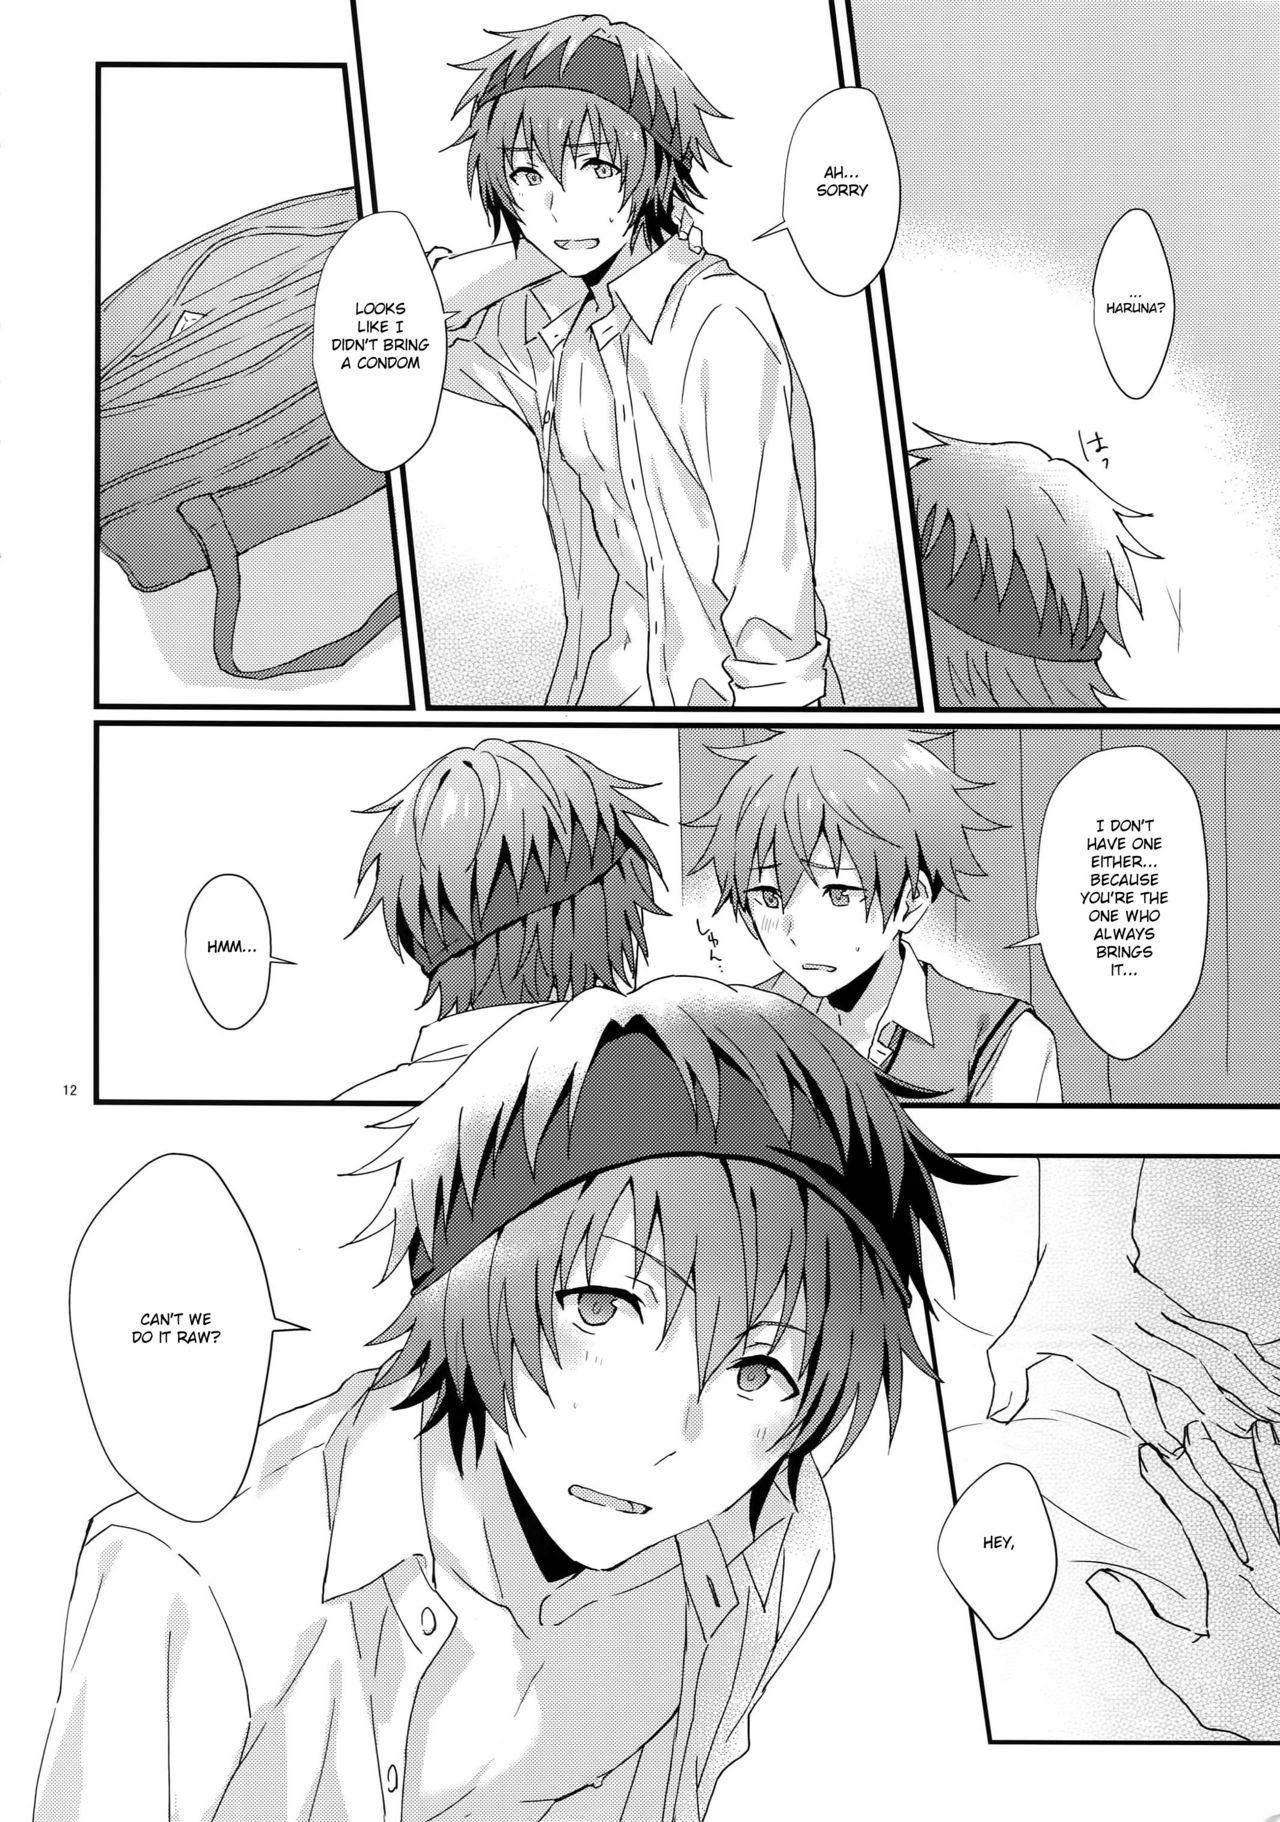 Morena Which One's Better? - The idolmaster Negao - Page 11